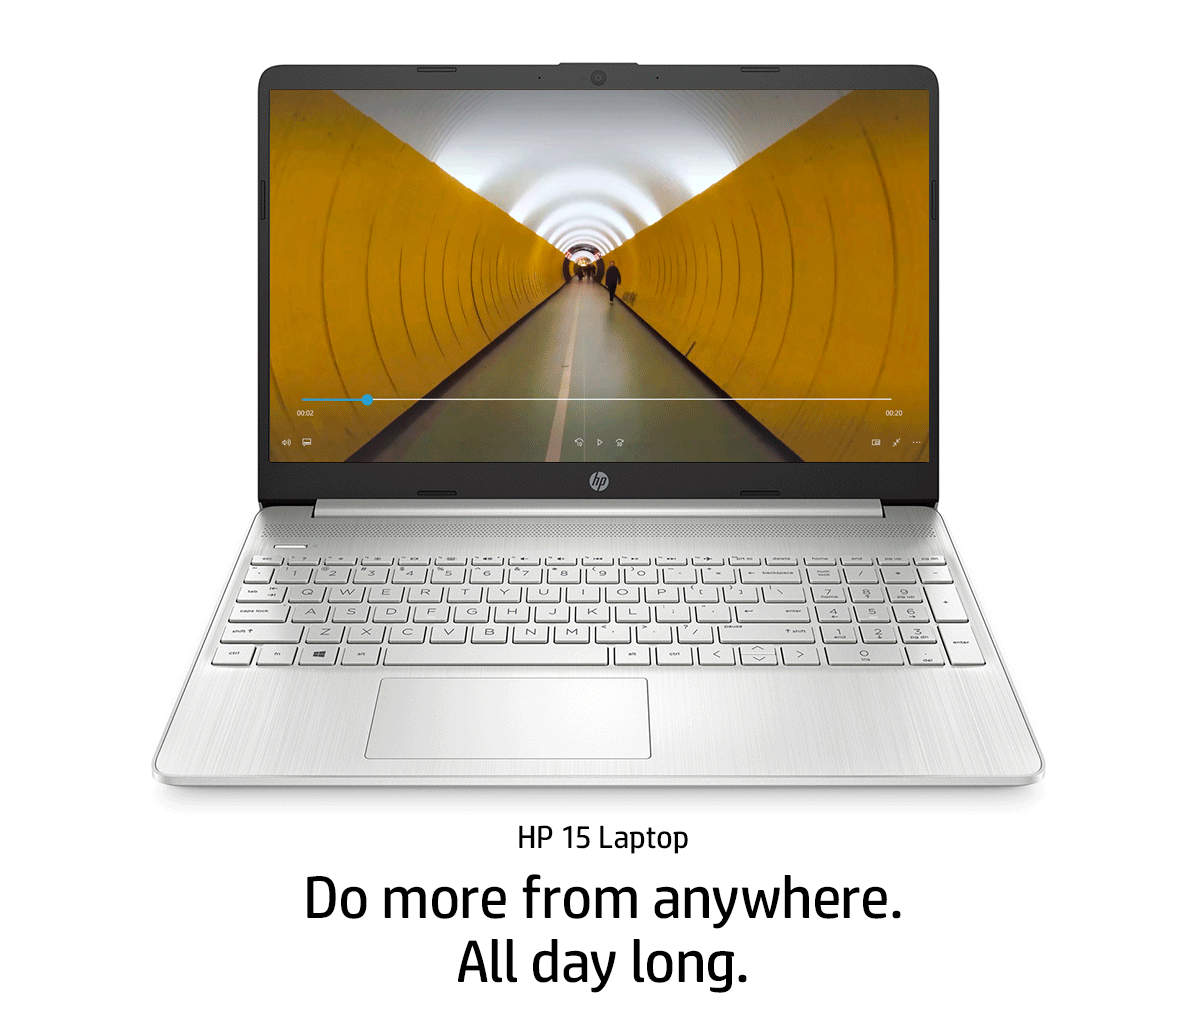 Hp 15 Laptop Do More From Anywhere All Day Long 9315